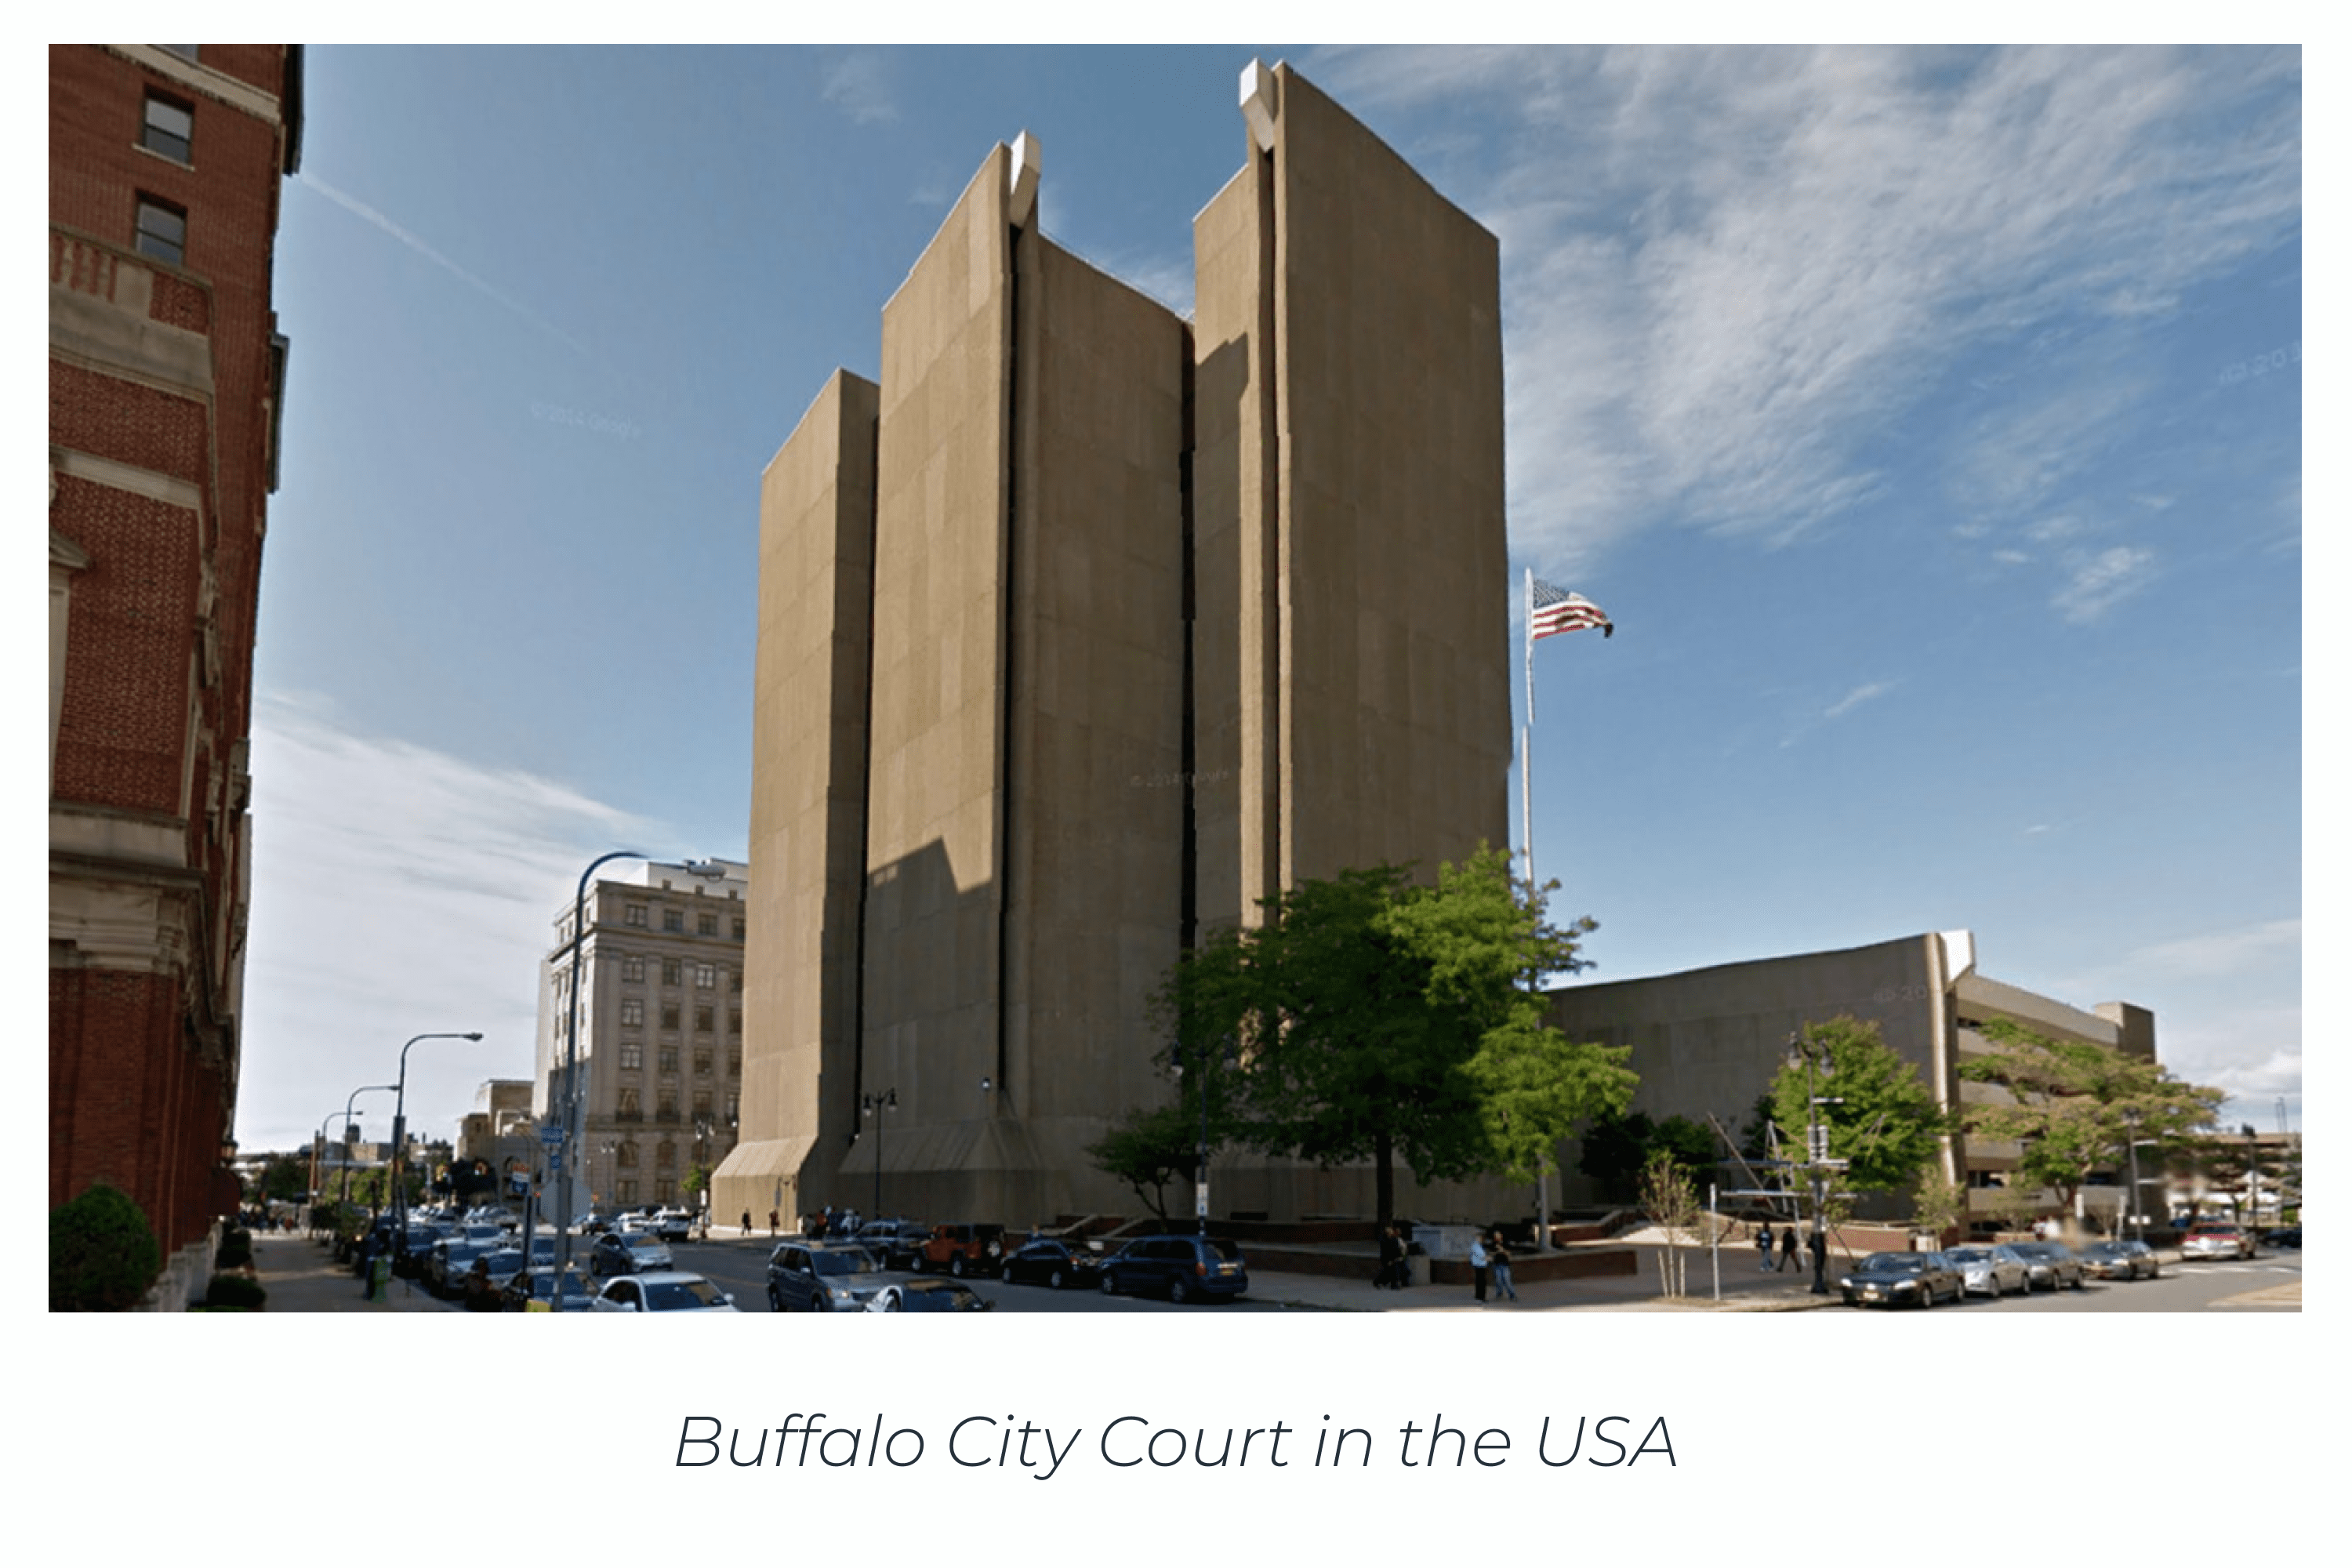 Buffalo City Court in the USA.